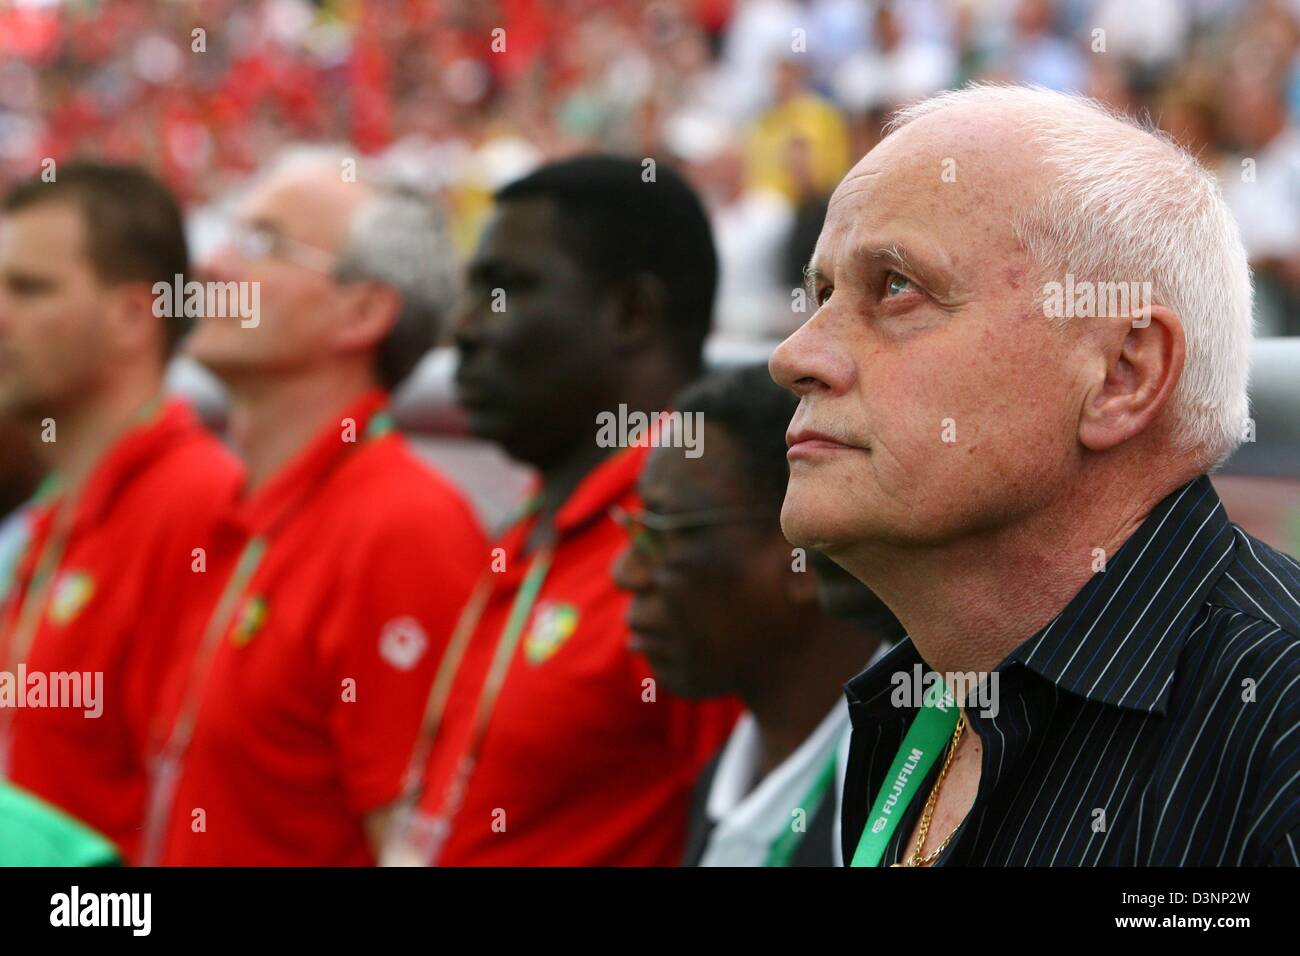 Togo national coach German Otto Pfister (R) stands in front of the bench prior to the 2006 FIFA World Cup group G match of Korea Republic vs Togo in Frankfurt, Germany, Tuesday, 13 June 2006. DPA/FELIX HEYDER +++ Mobile Services OUT +++ Please also refer to FIFA's Terms and Conditions. +++(c) dpa - Bildfunk+++ Stock Photo